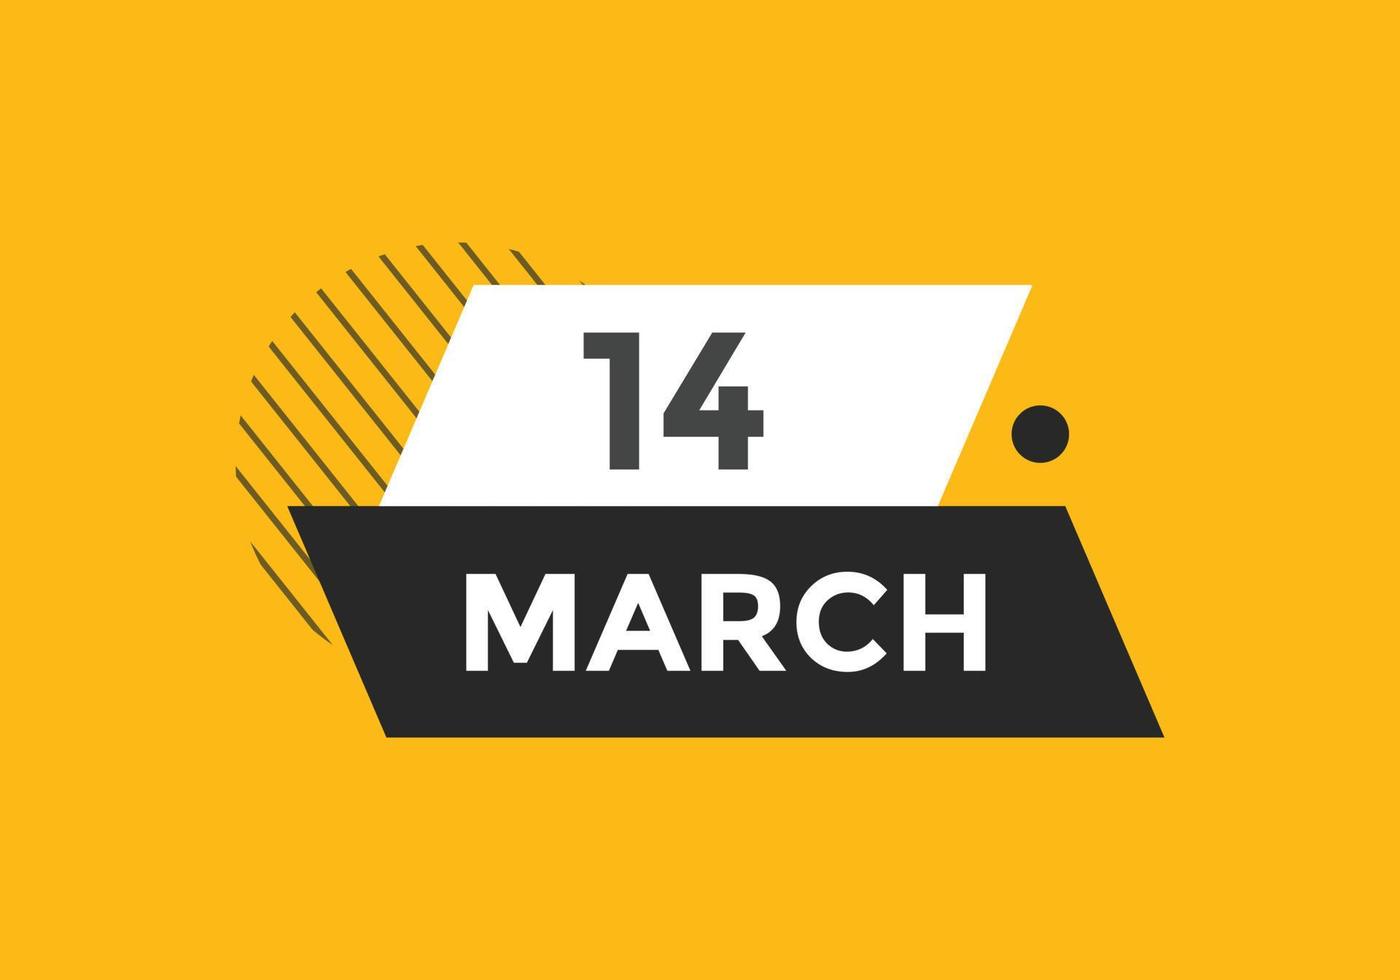 march 14 calendar reminder. 14th march daily calendar icon template. Calendar 14th march icon Design template. Vector illustration